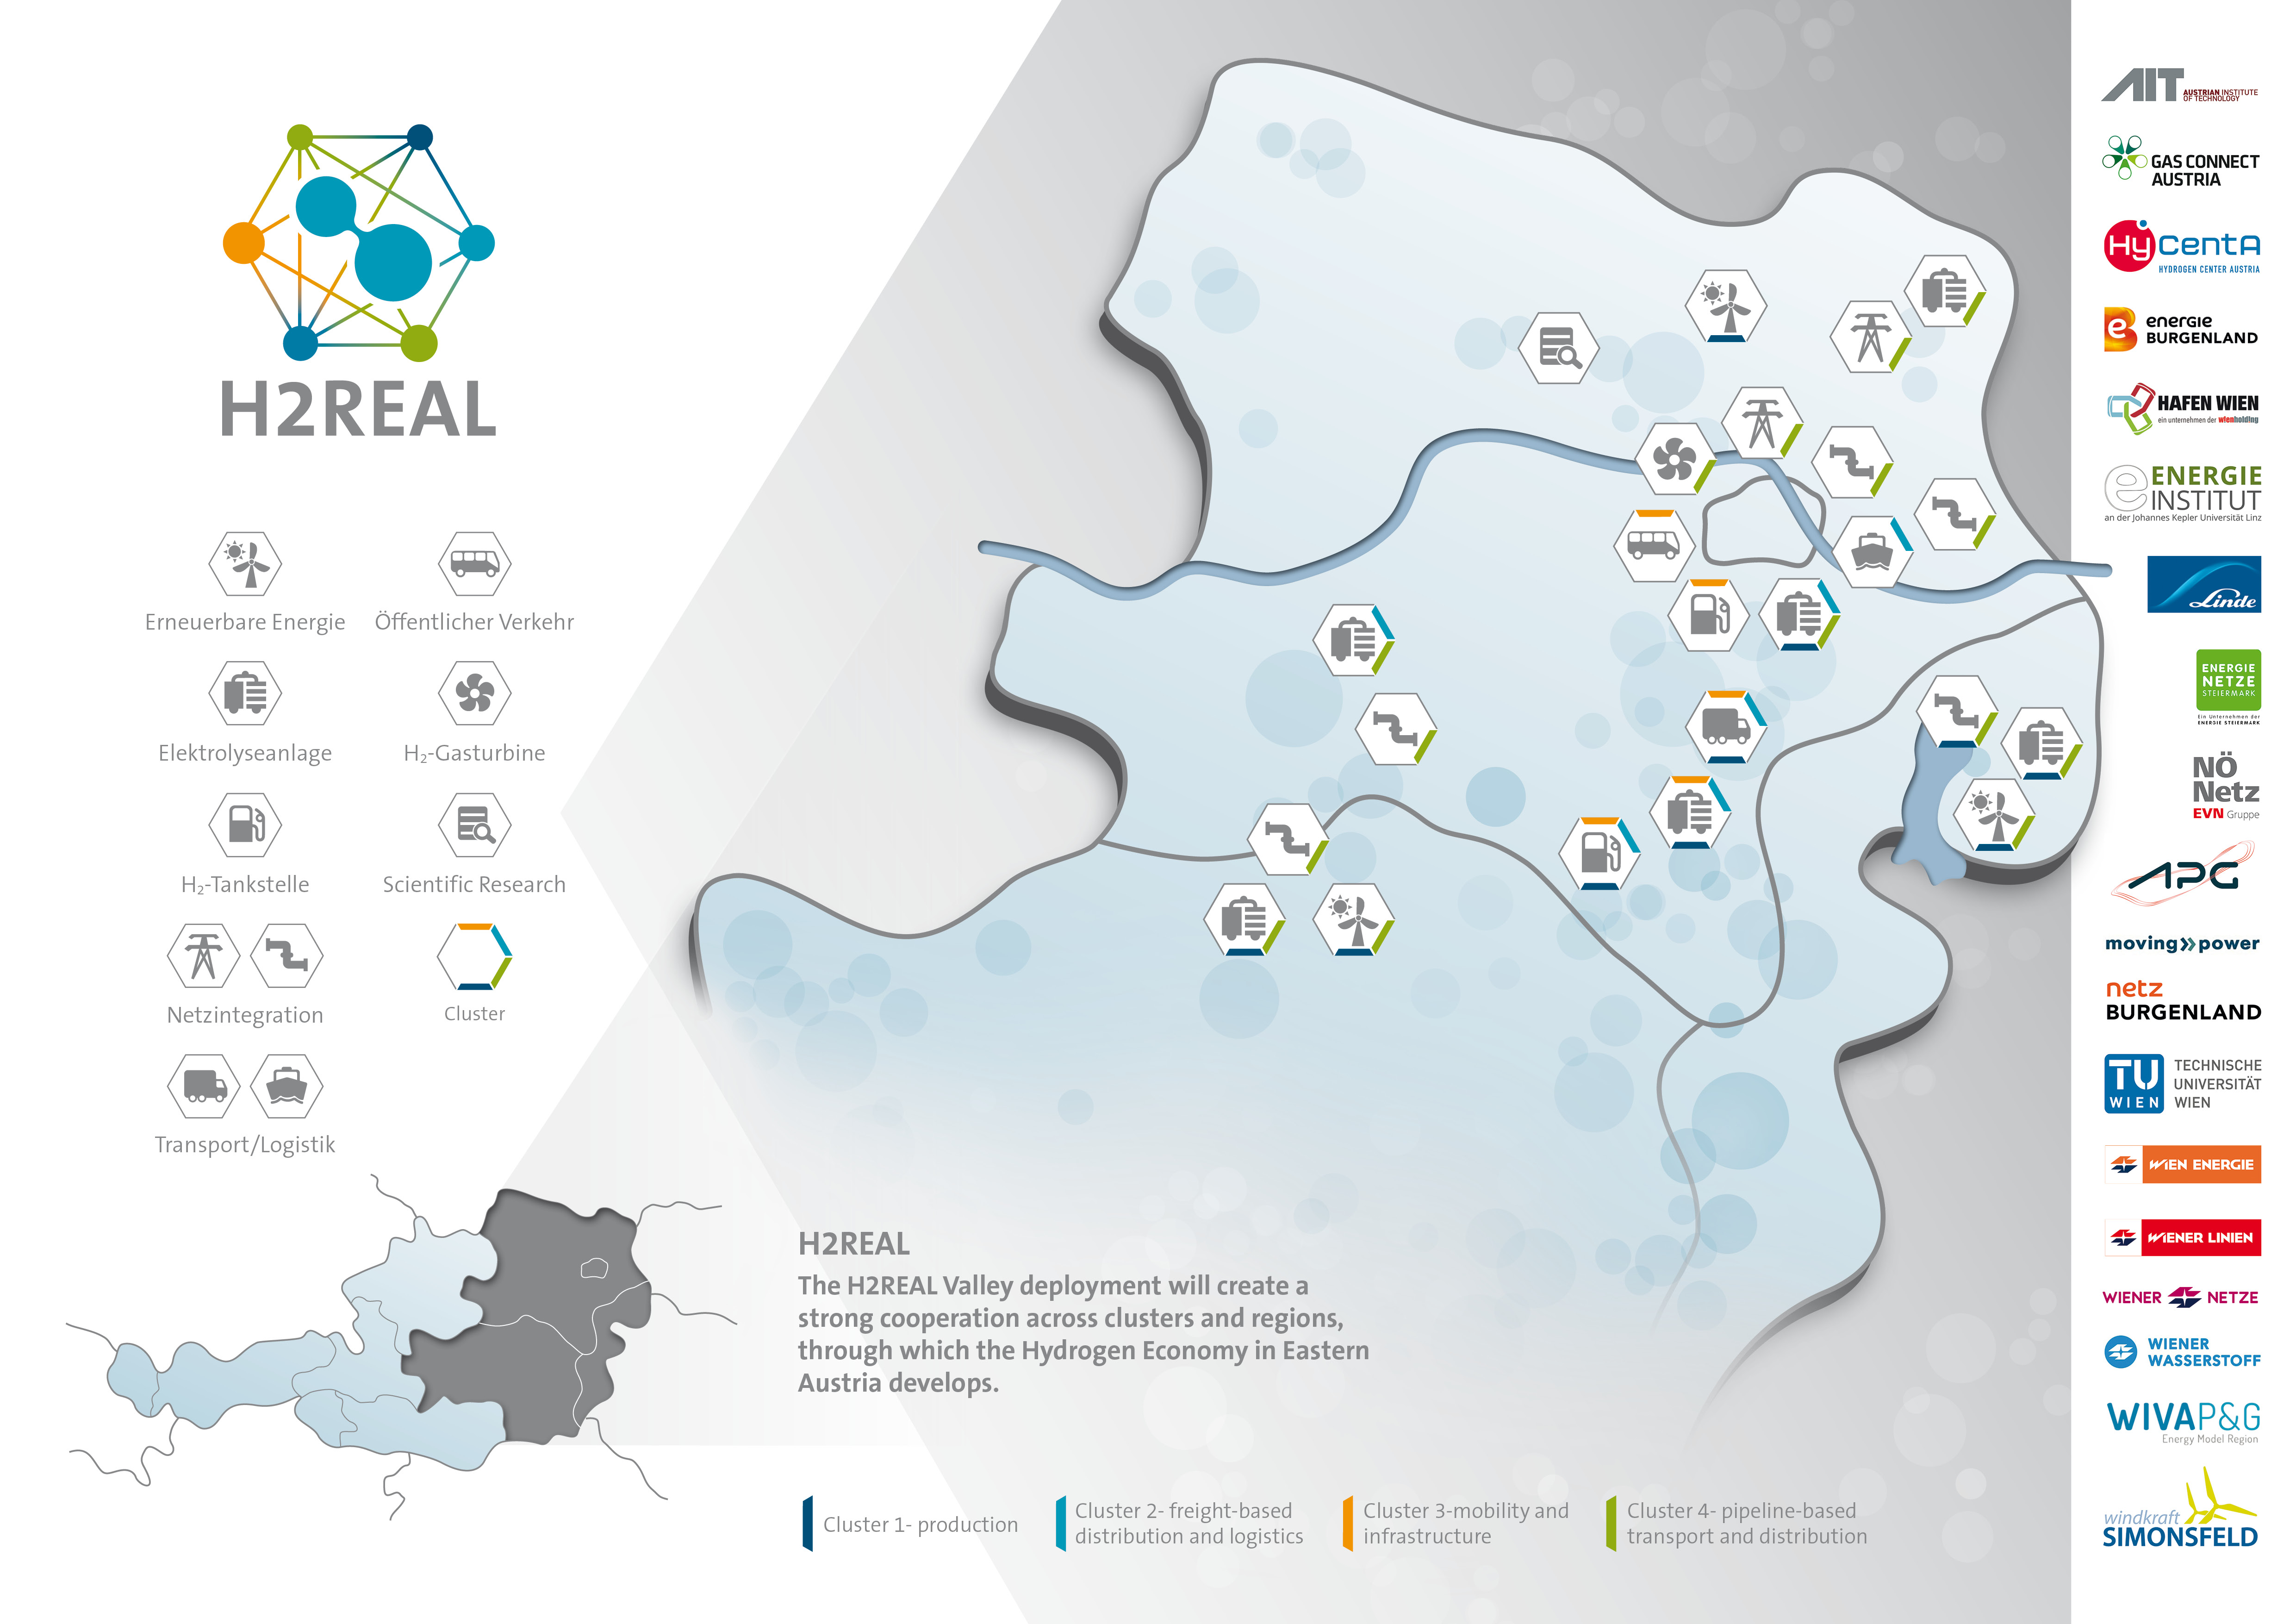  Map of Eastern Austria showing the project partners and their services as well as the clusters formed